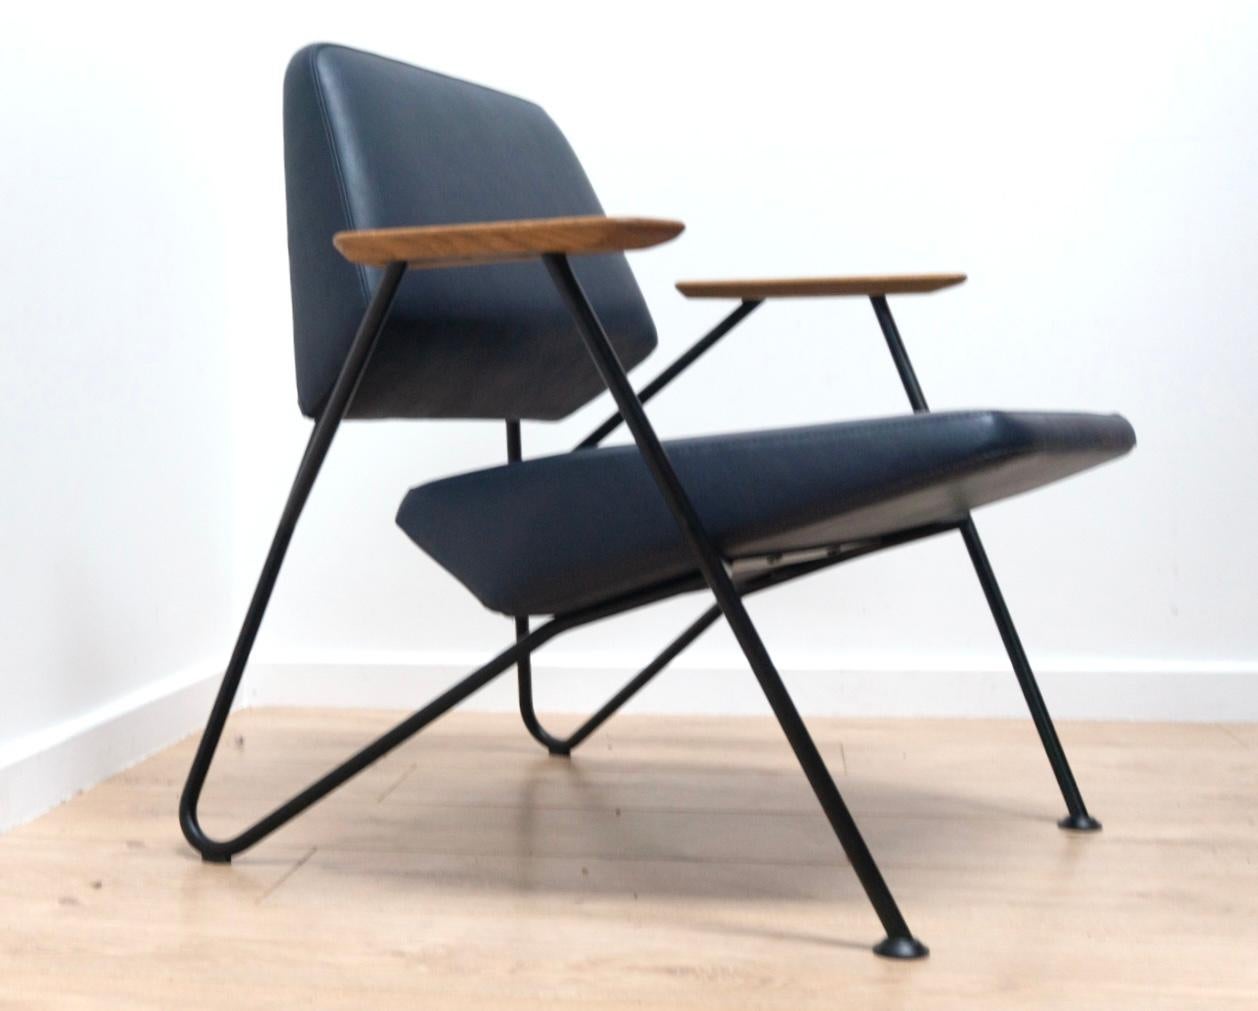 Original Modernist Polygon Easy Chair Designed for high quality contemporary modern furniture manufacturers Prostoria. Minimalist design with quality craftsmanship throughout. The chair features light oak paddle armrests, original black steel finish